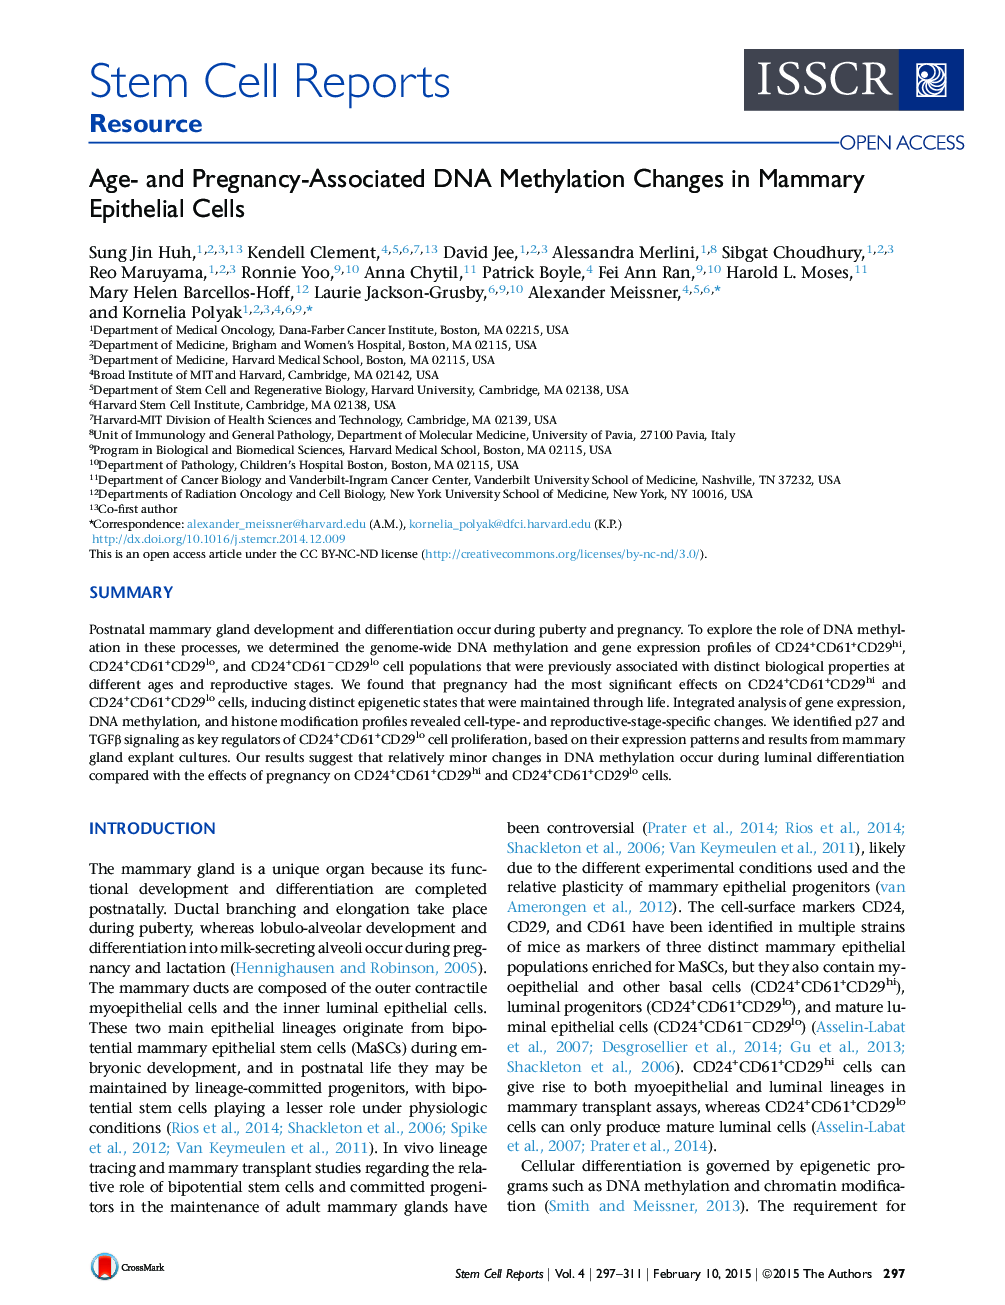 Age- and Pregnancy-Associated DNA Methylation Changes in Mammary Epithelial Cells 